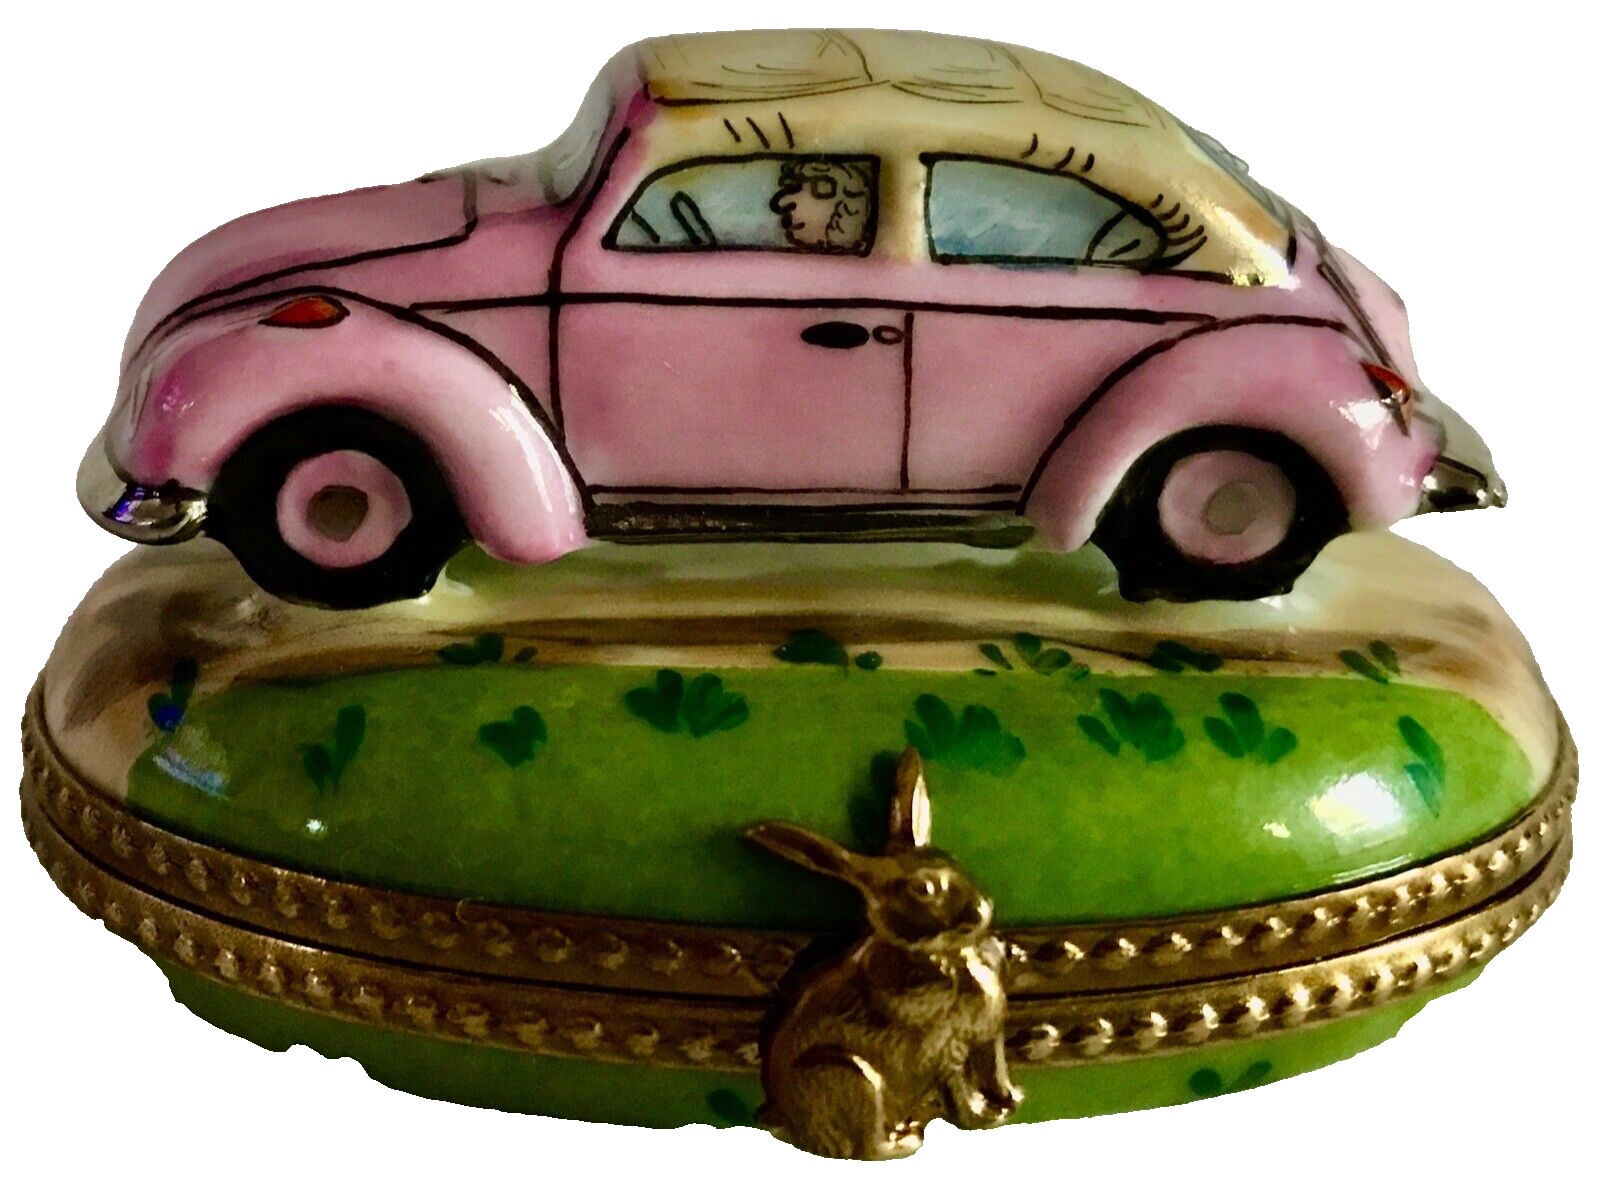 LIMOGES Beautiful & Rare Volkswagen Car Trinket Box, Hand painted, Signed